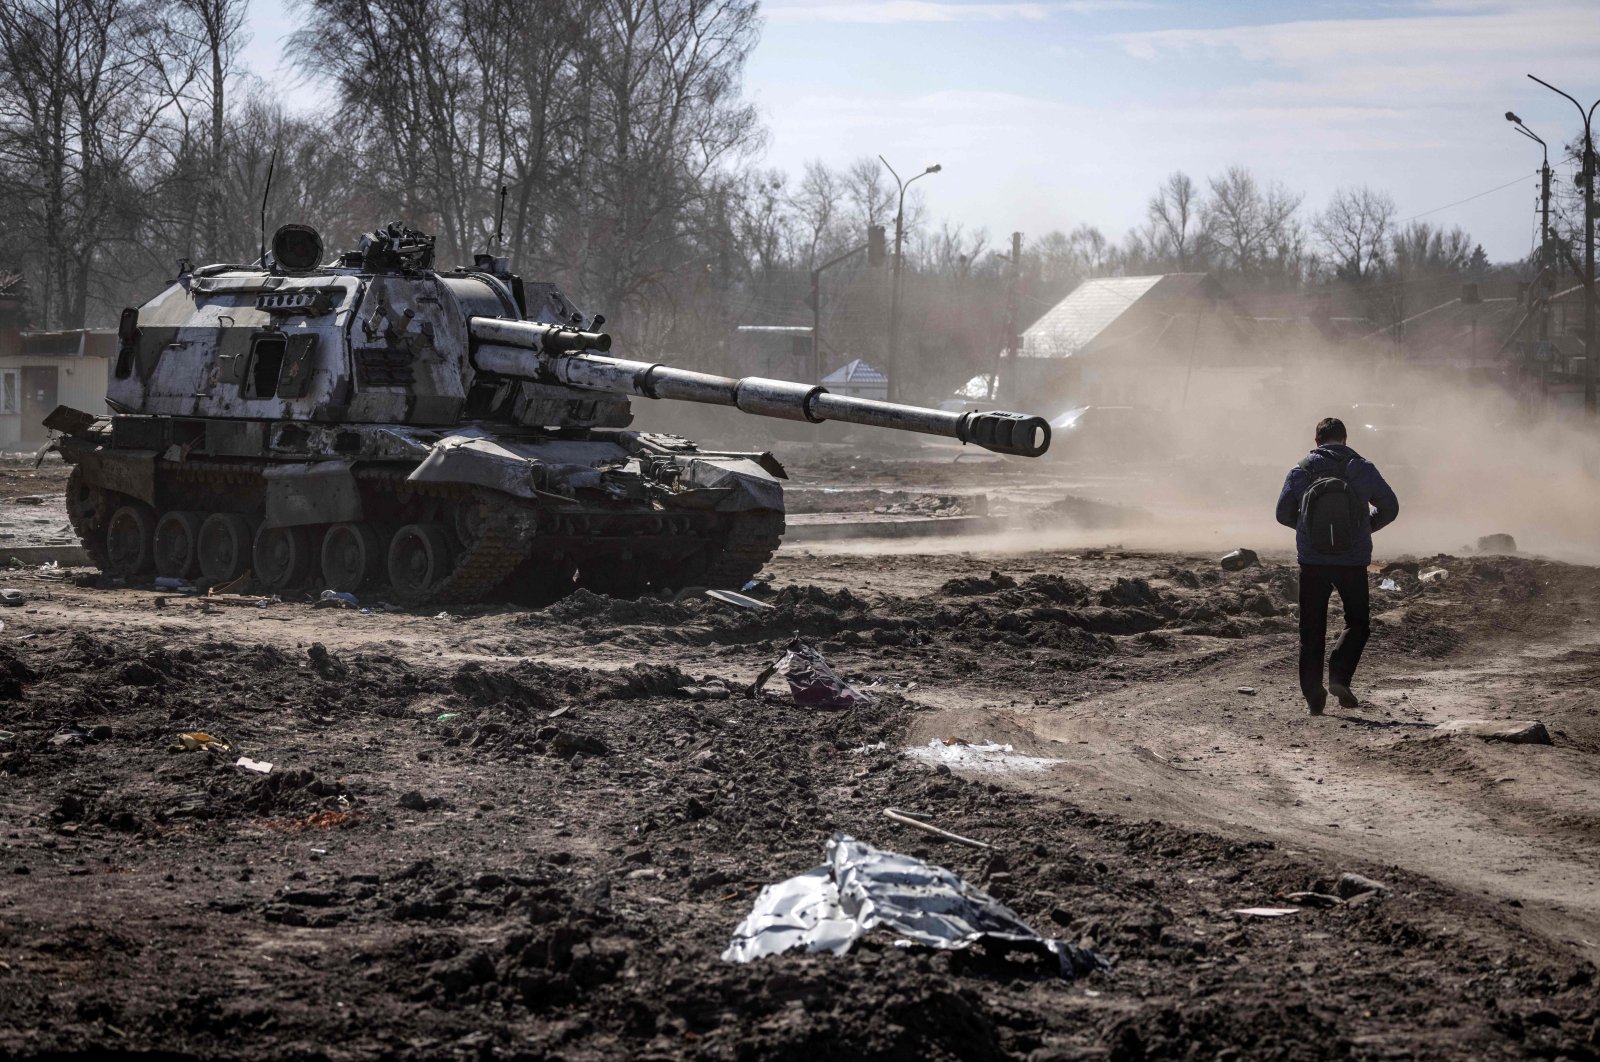 A resident walks near a damaged Russian tank in the northeastern city of Trostianets, Ukraine, March 29, 2022. (AFP Photo)